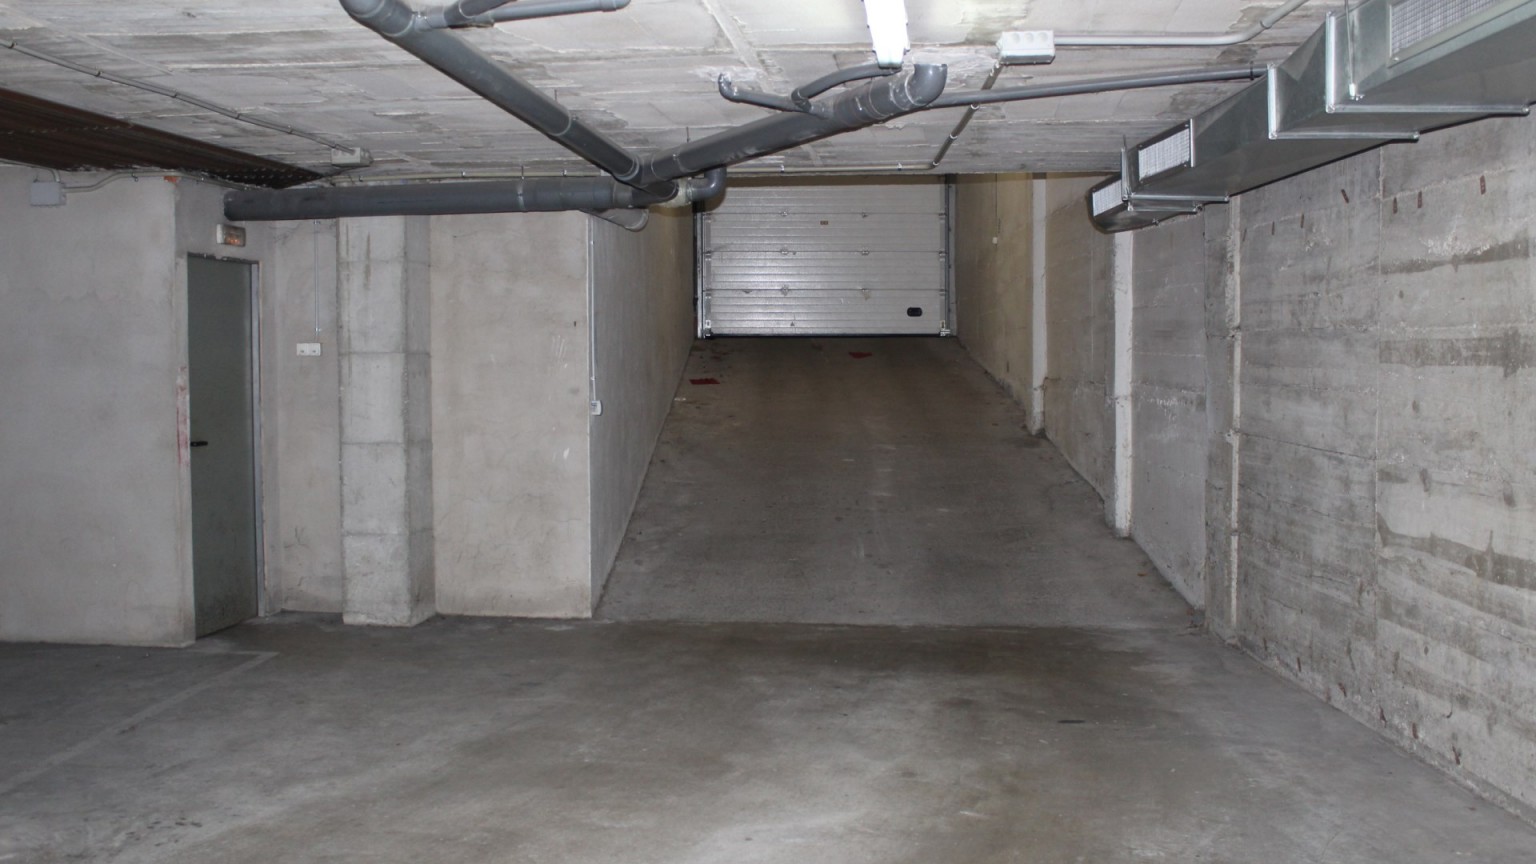 Parking place  for rent situated in the center of La Vila.